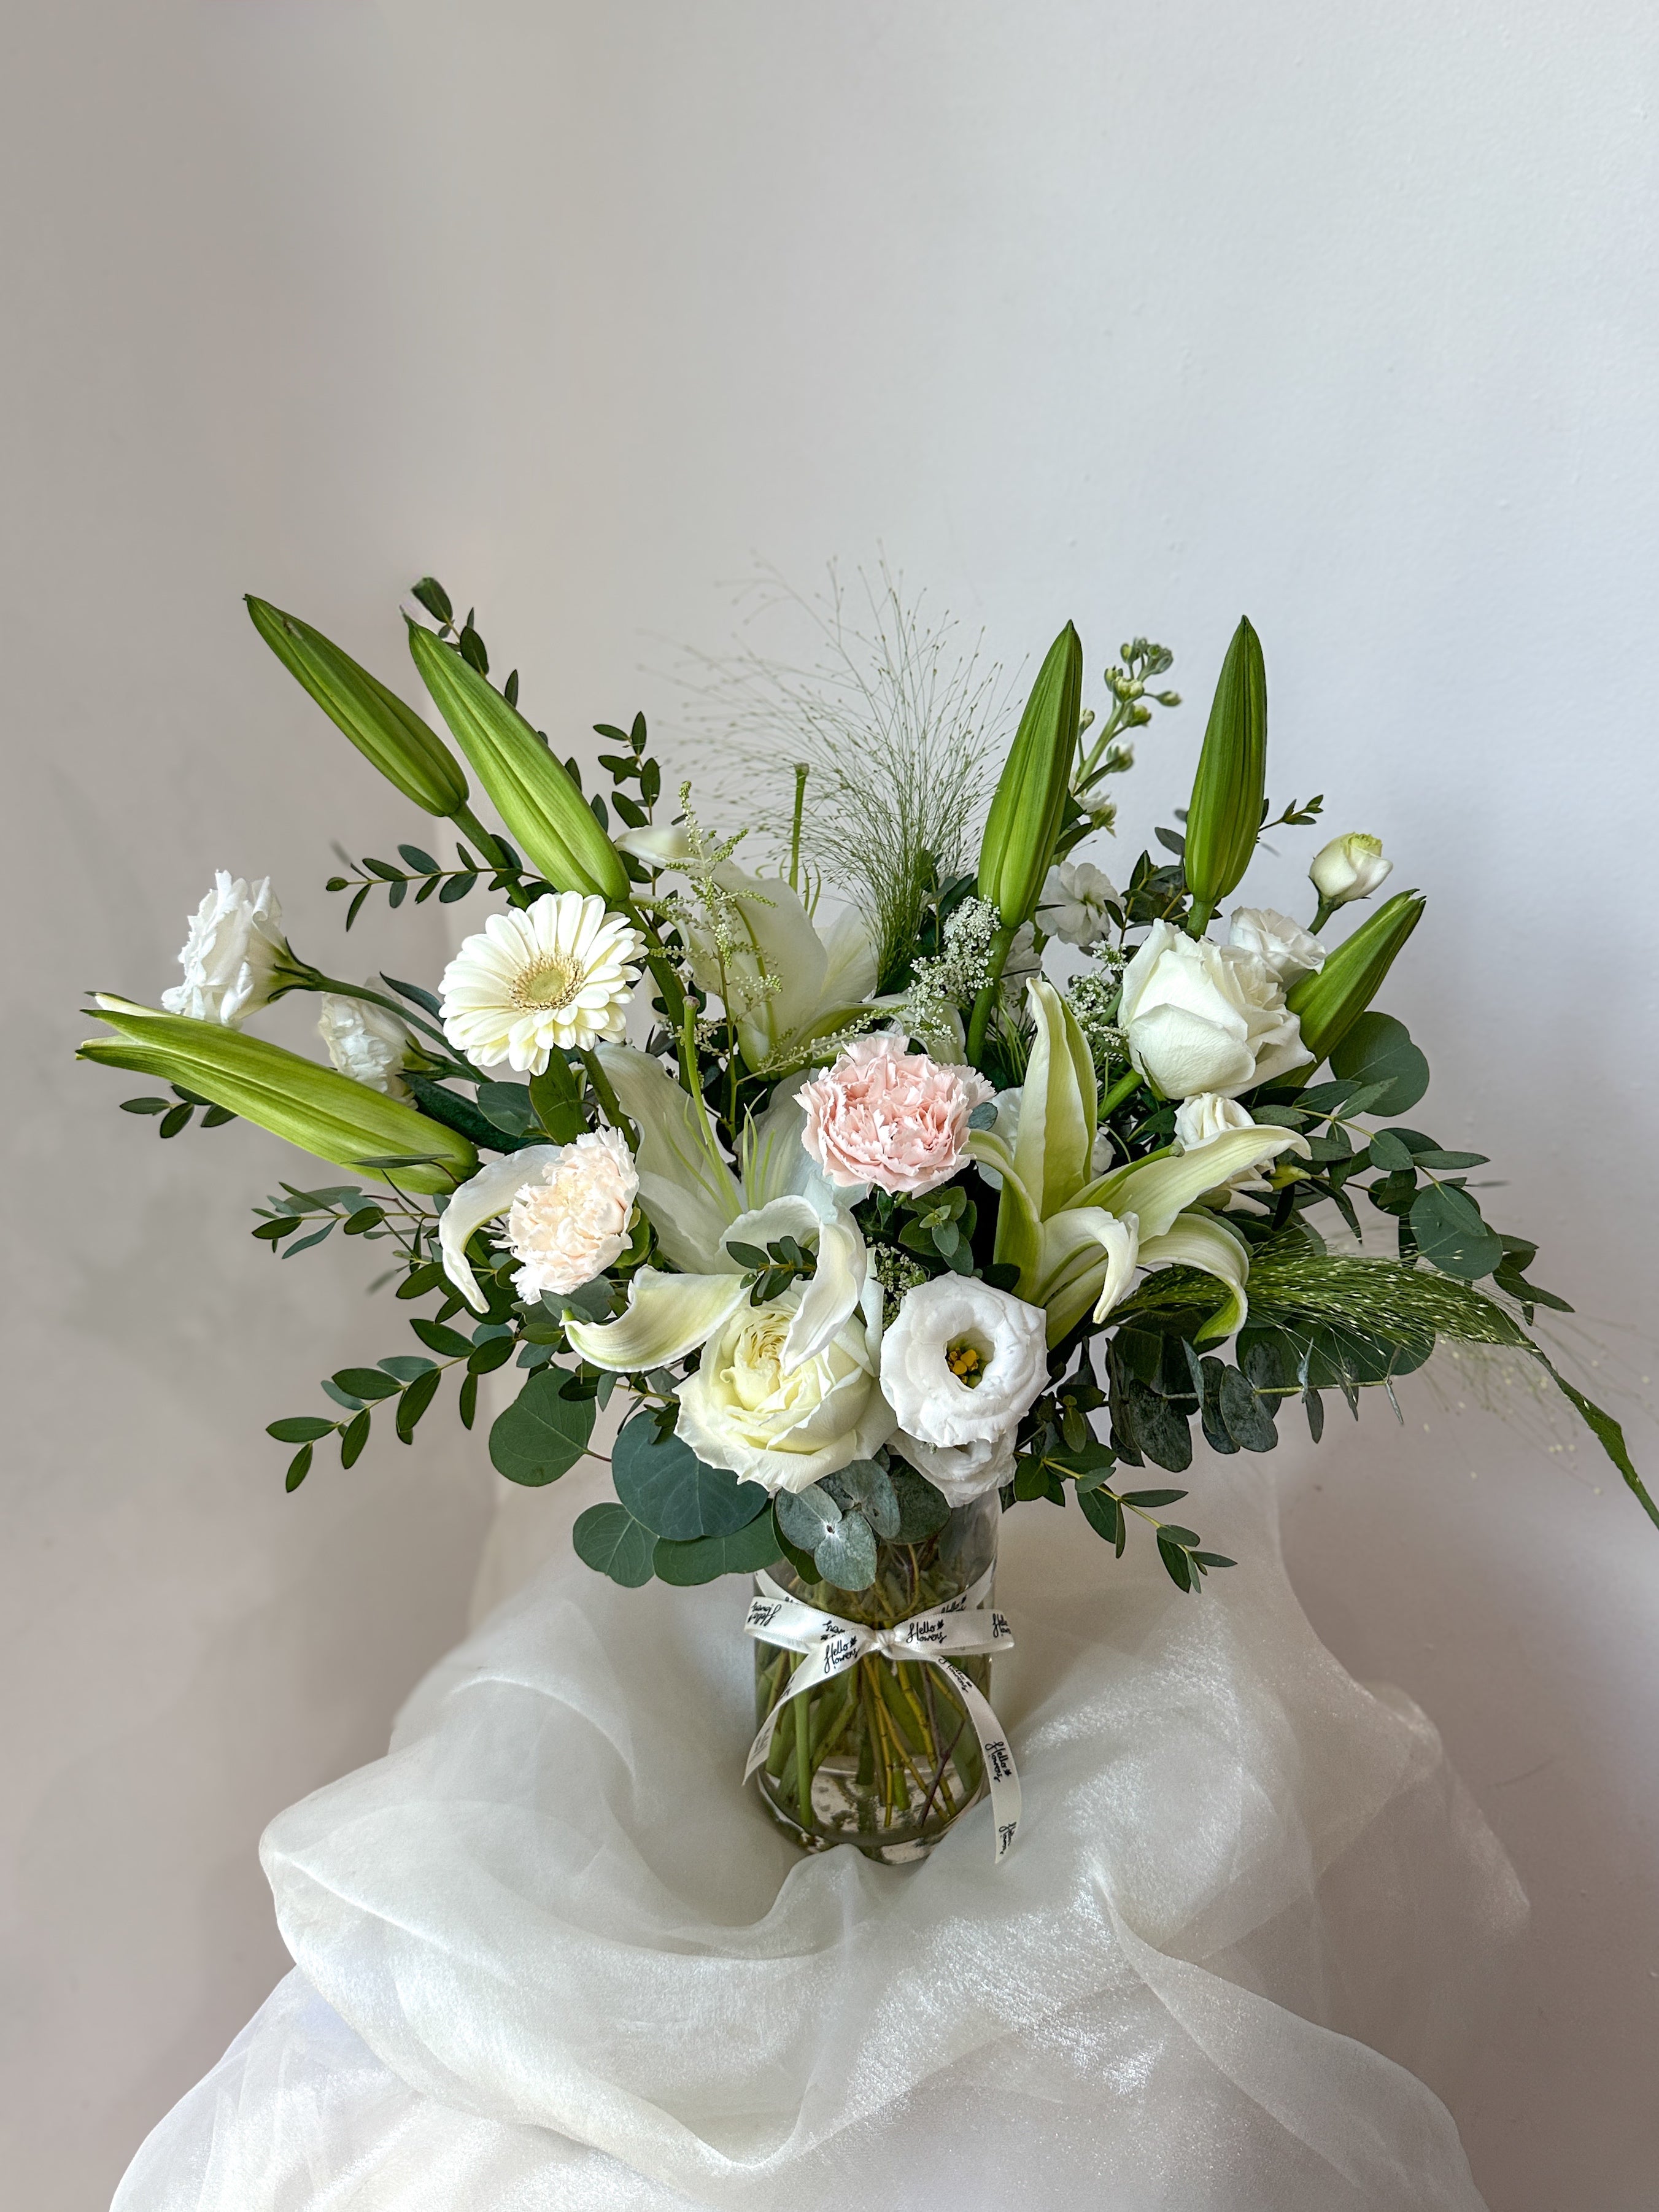 [2 days Advanced Order] Laura in a Vase - White Lilies